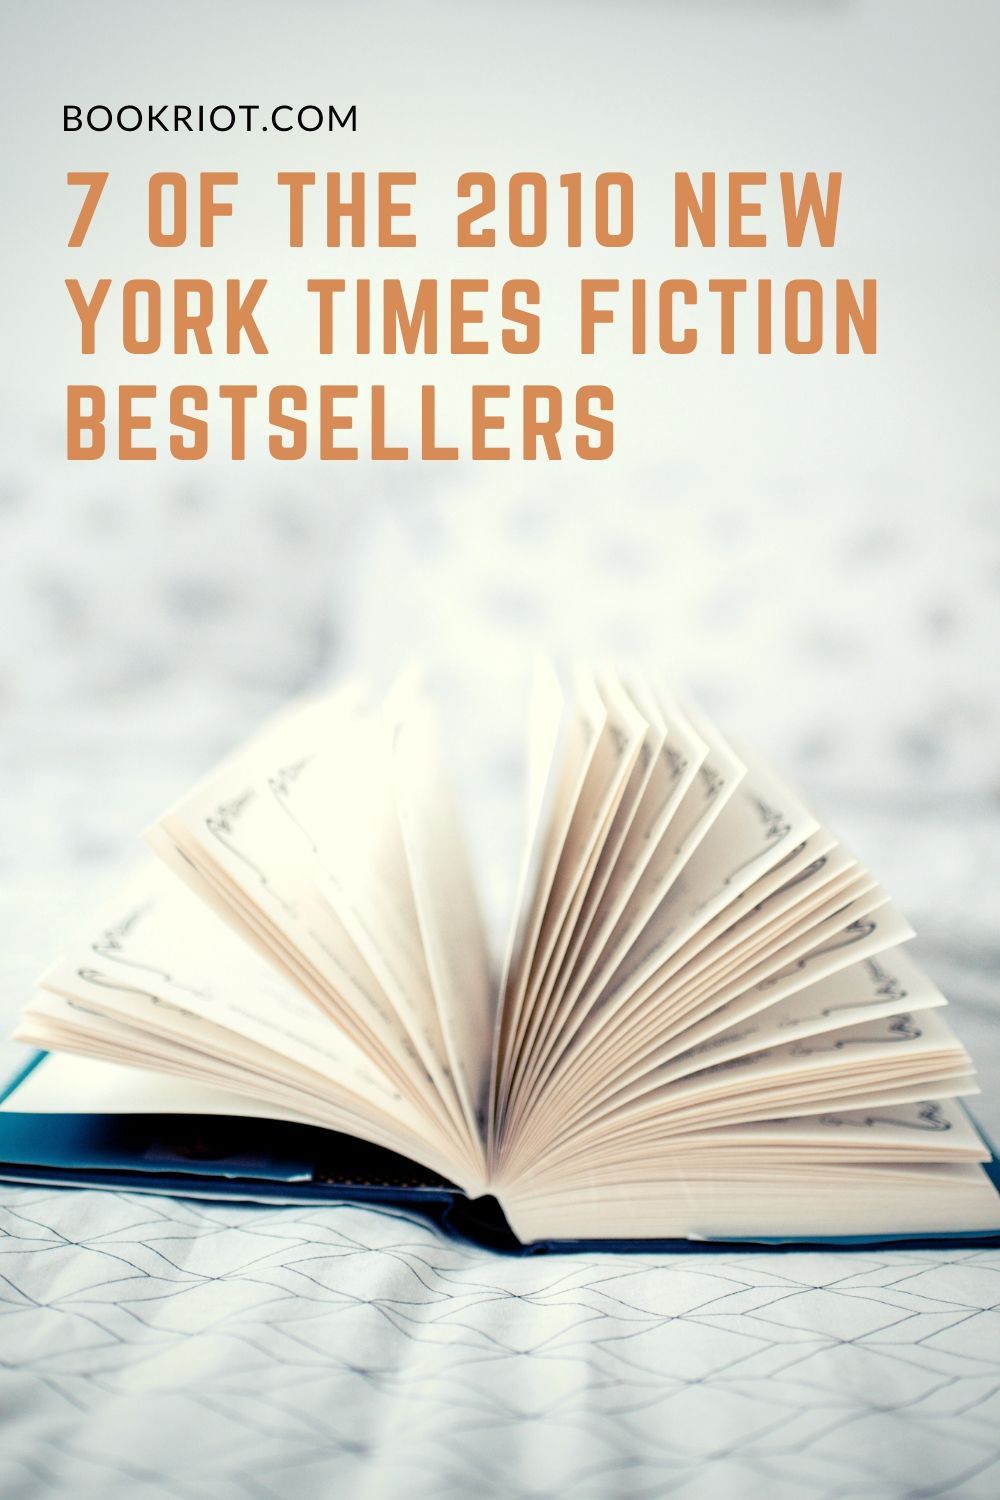 7 of the 2010 New York Times Fiction Bestsellers Book Riot